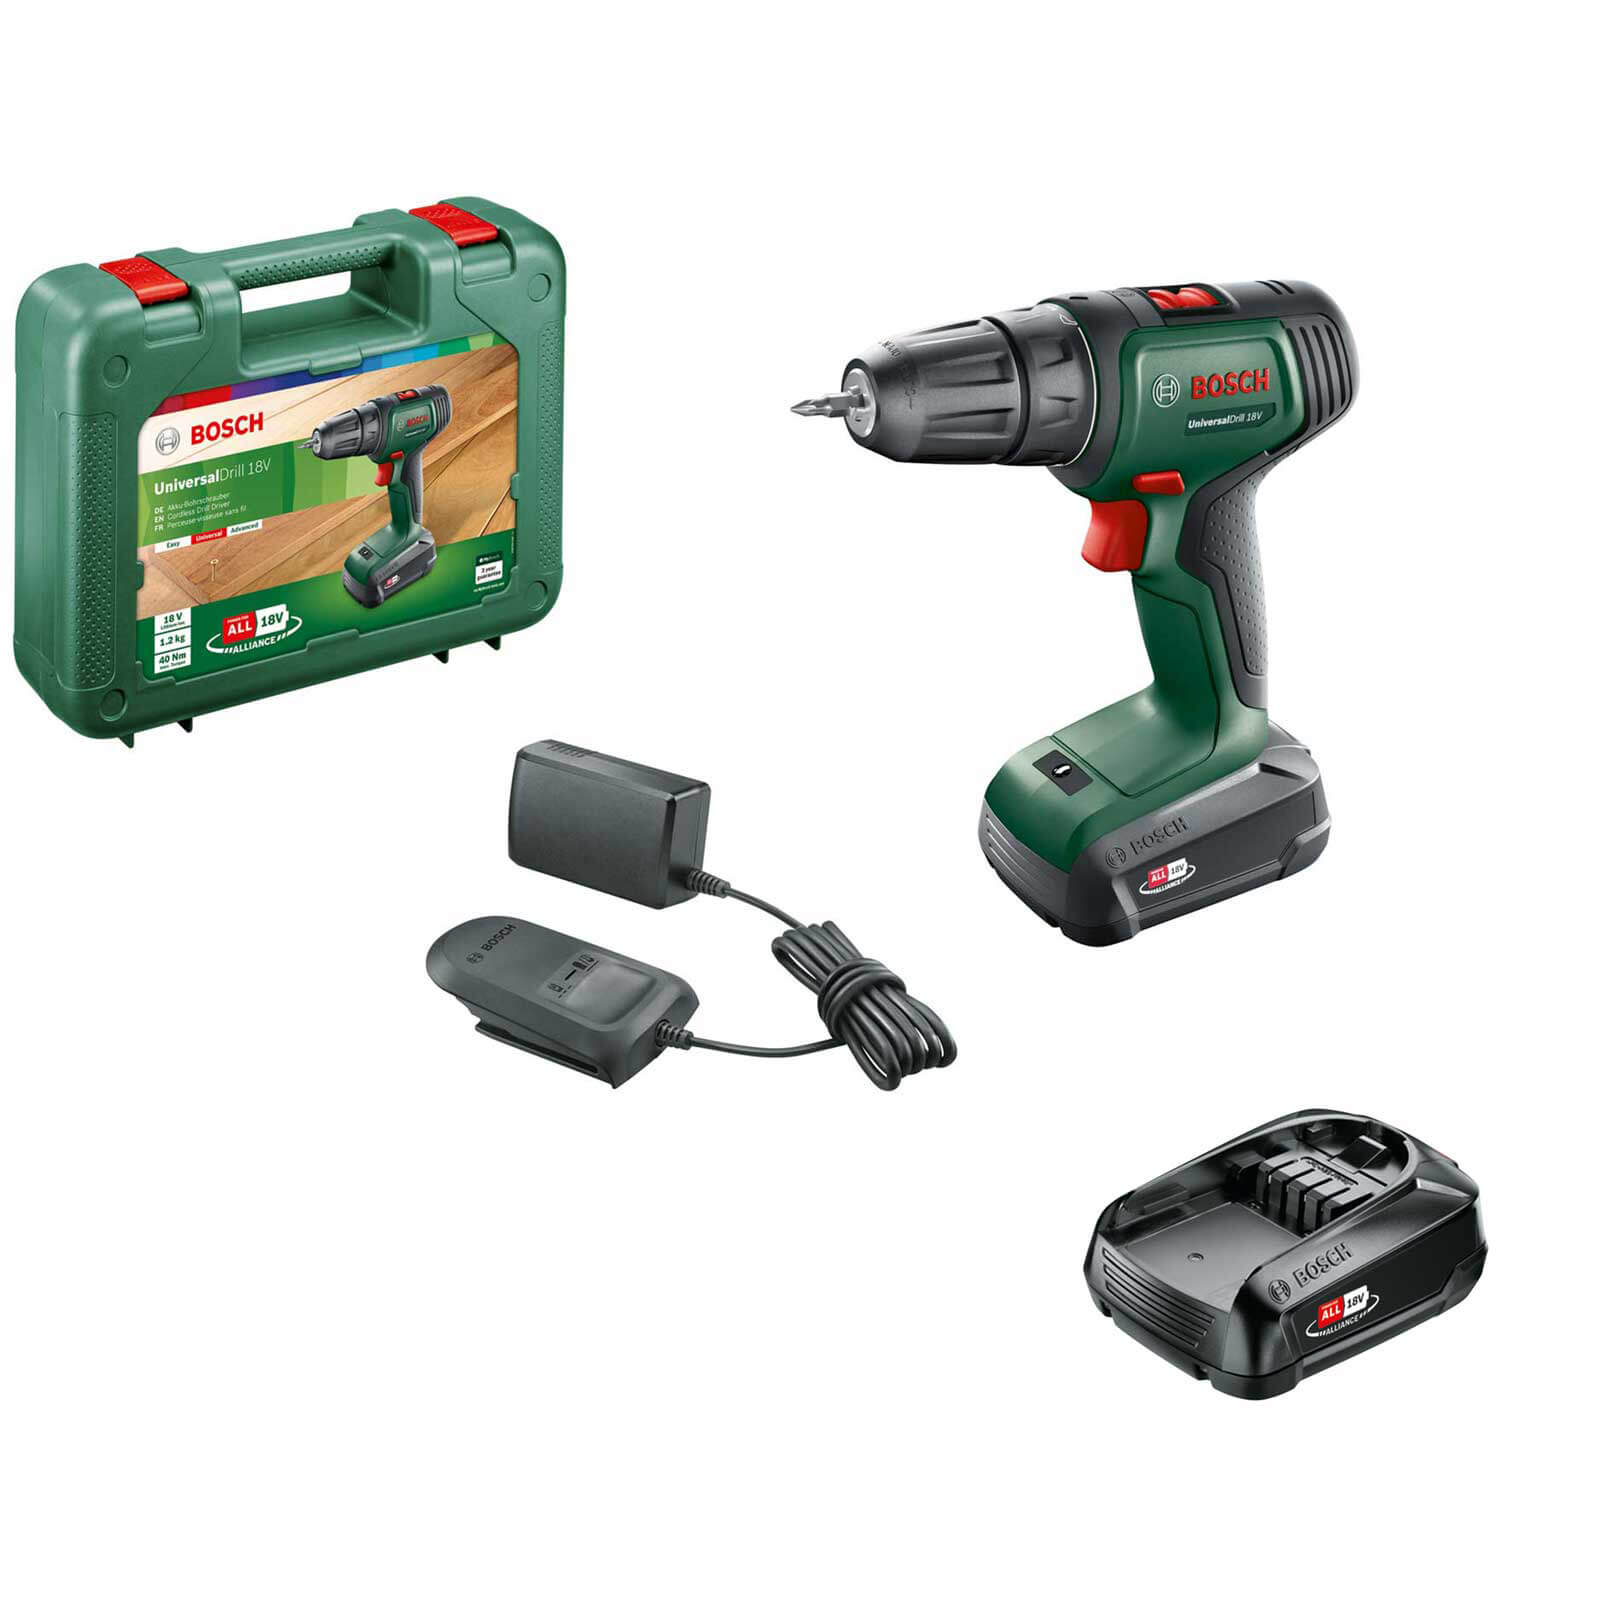 Image of Bosch UNIVERSALDRILL 18v Cordless Drill Driver 2 x 1.5ah Li-ion Charger Case